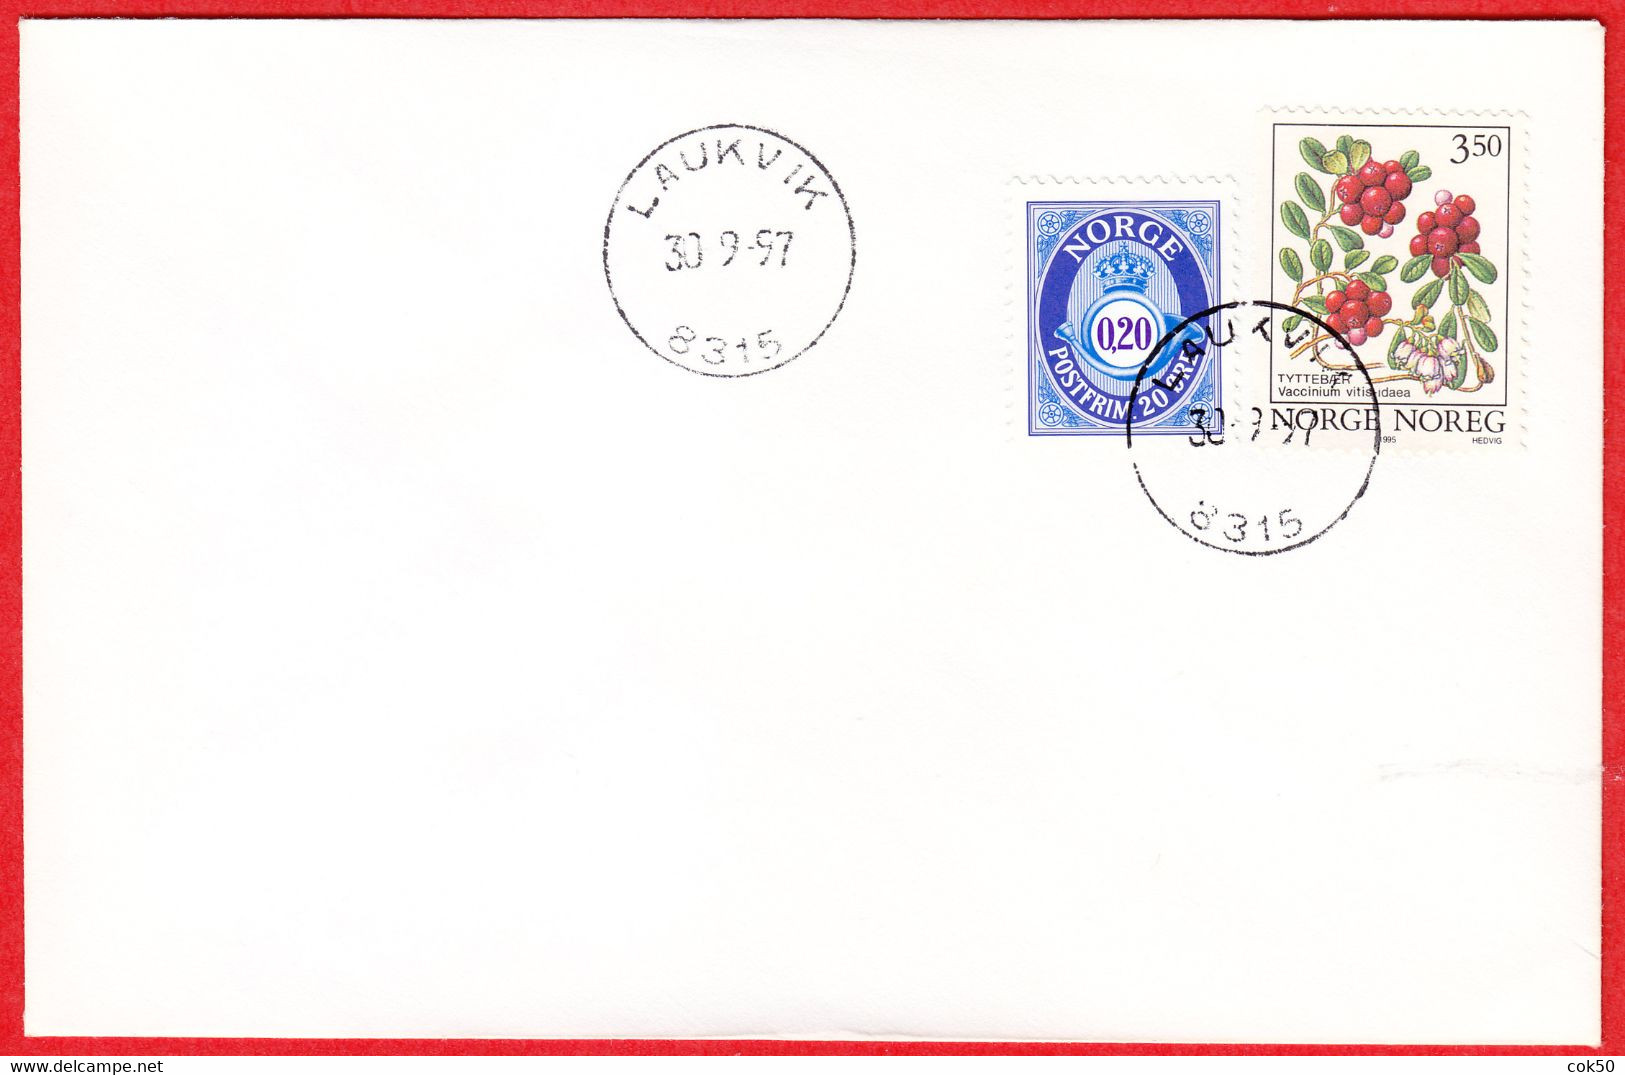 NORWAY -  8315 LAUKVIK - (Nordland County) - Last Day/postoffice Closed On 1997.09.30 - Lokale Uitgaven